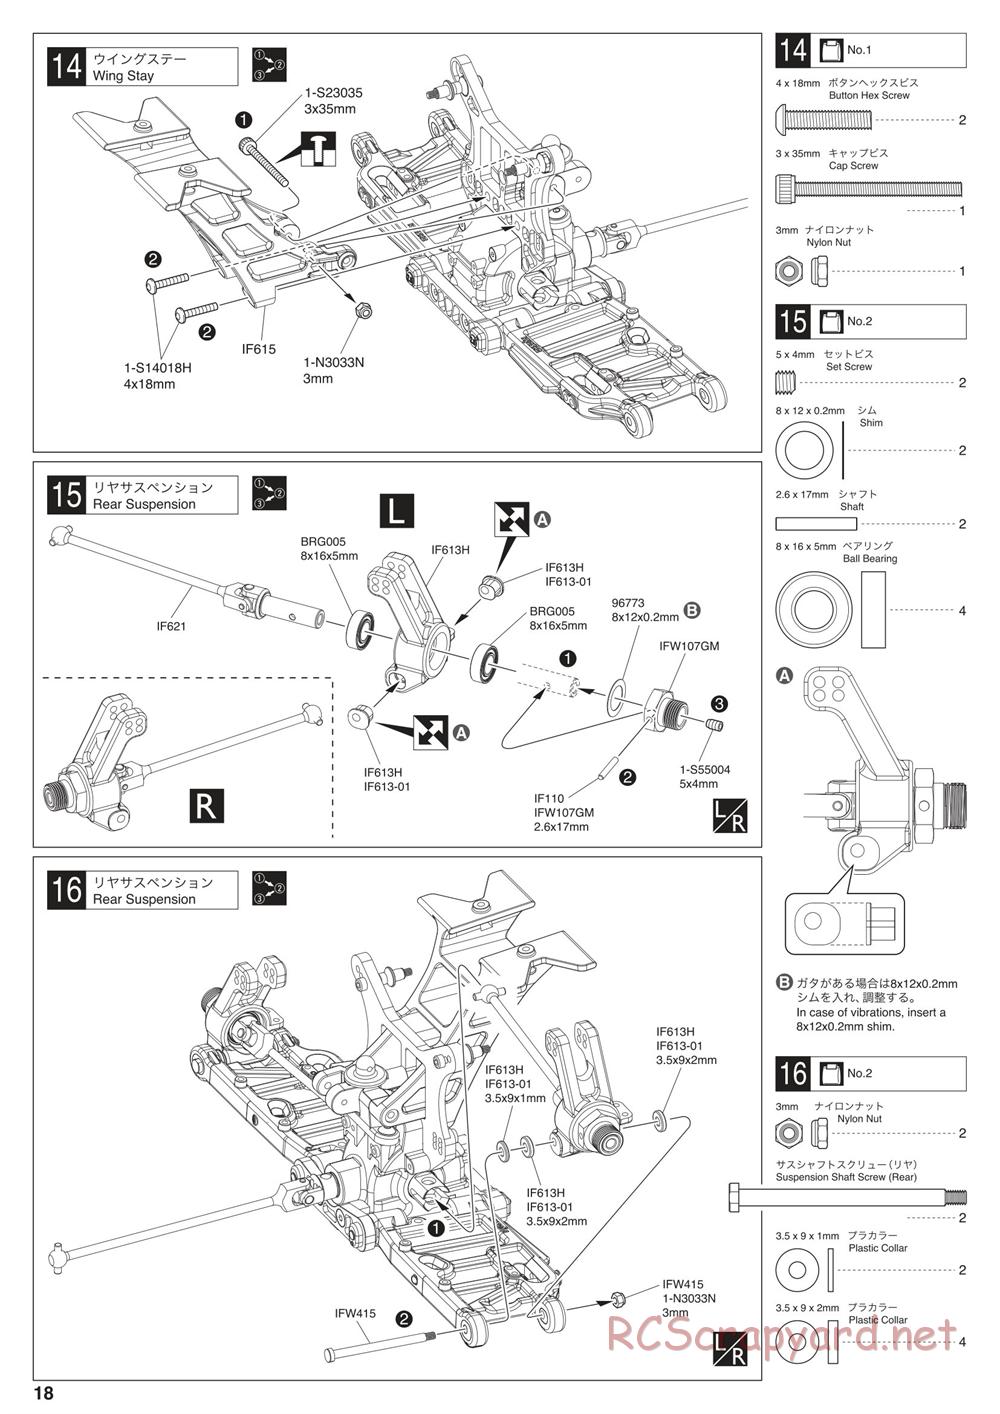 Kyosho - Inferno MP10 - Manual - Page 18